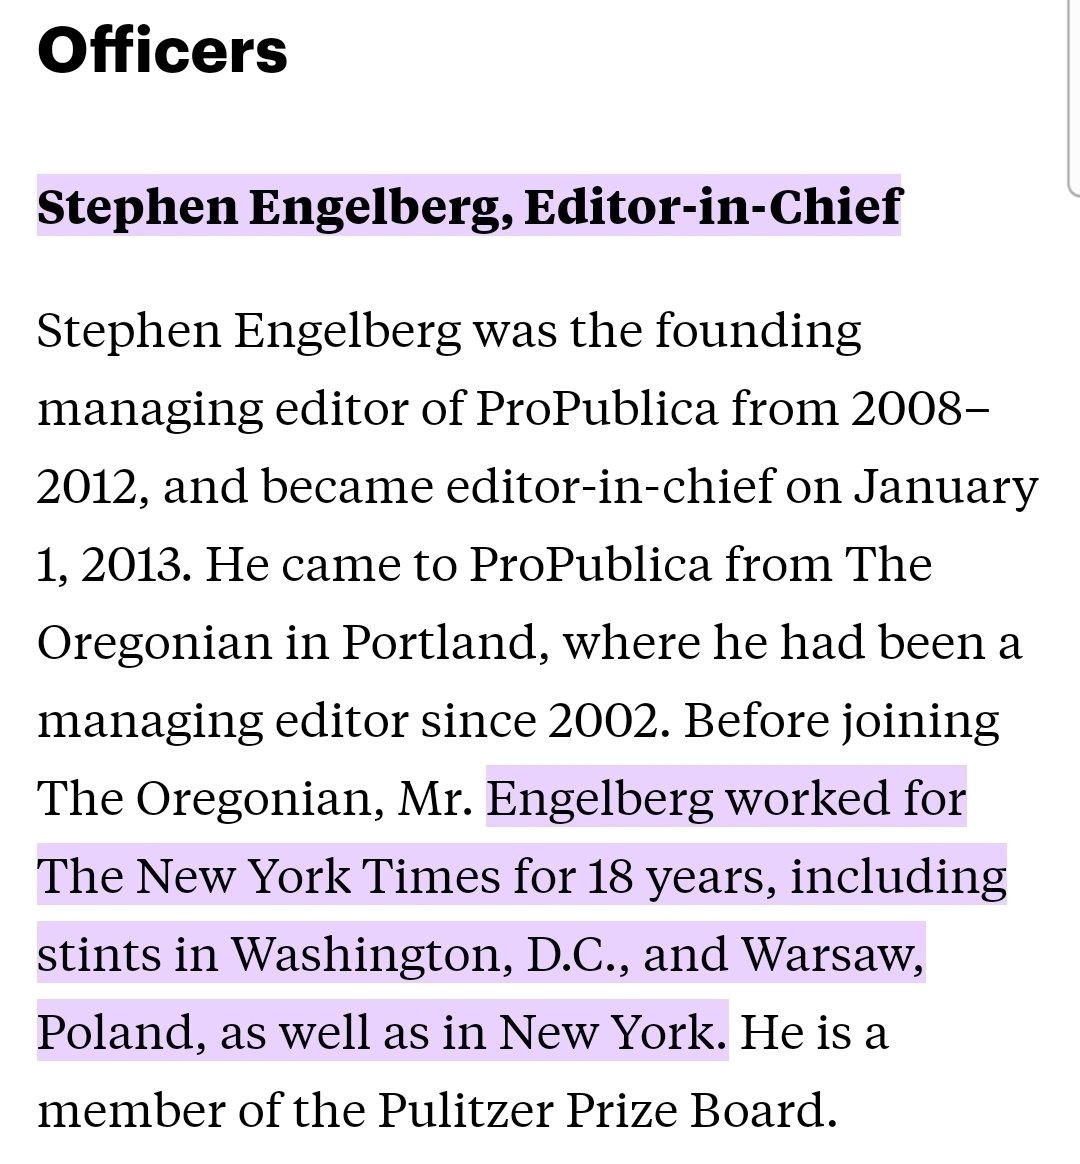 Something I learned from this: Iraq war charlatan Judith Miller's editor at the Times, Stephen Engelberg, is now the long-time EIC at ProPublica. There really are no consequences for journalistic deceit if it serves the right people!